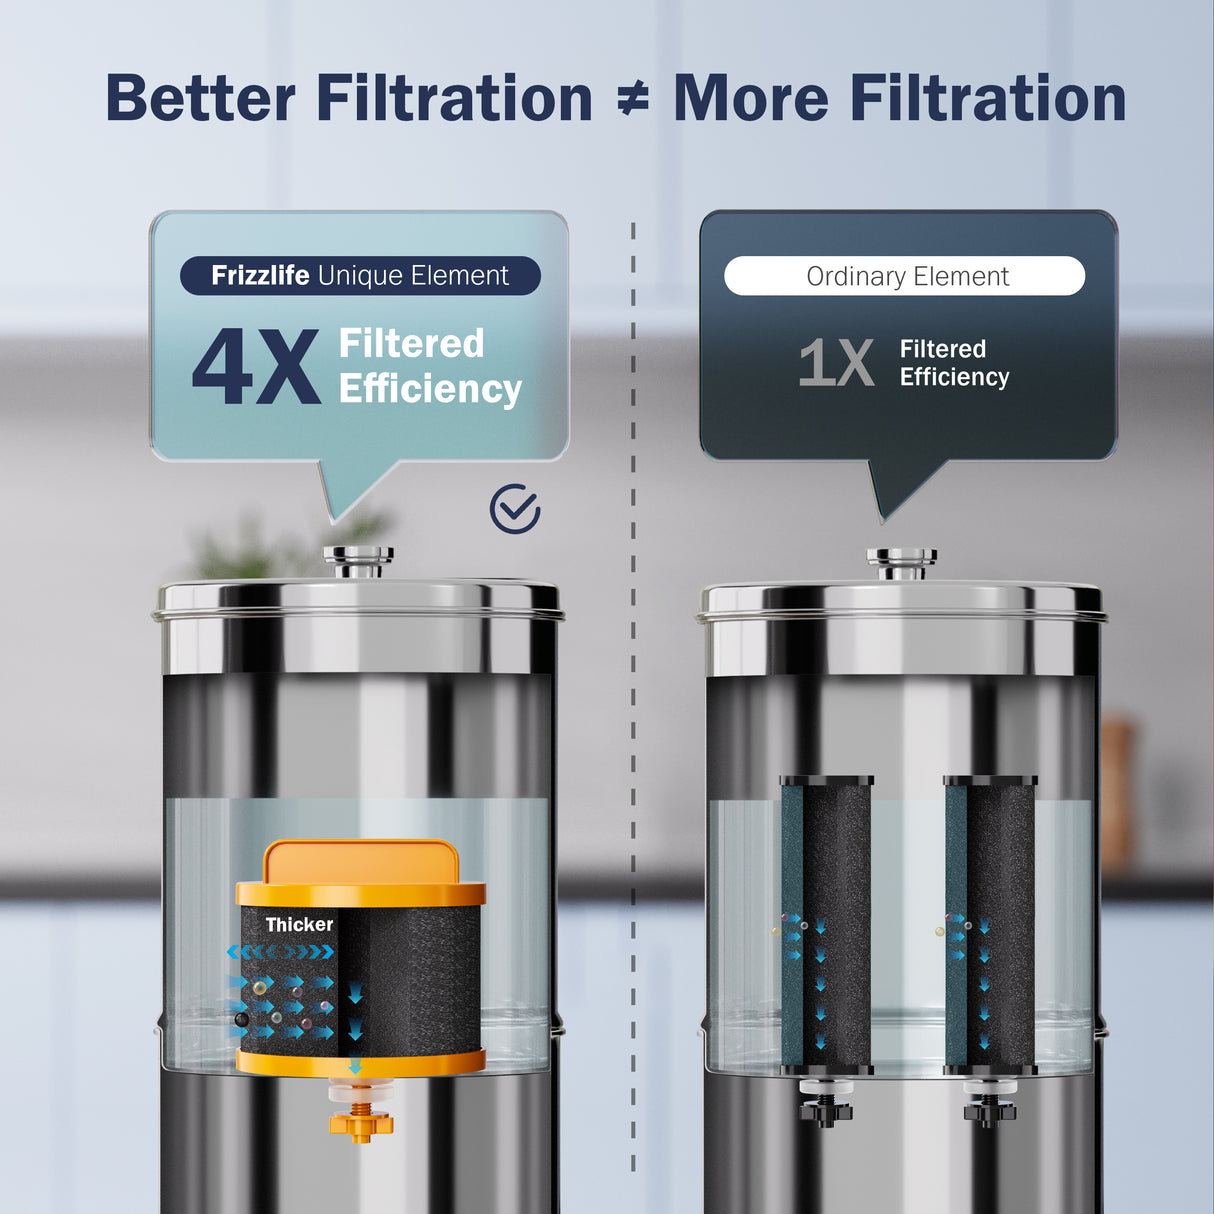 Frizzlife G210-SCALE Gravity-Fed Water Filter System, NSF Certified Element with Scale Inhibition Reduces 99.9% Chlorine, Taste & Odor, Impurity, Purifier System with Stand for Home, Camping, 2.25G